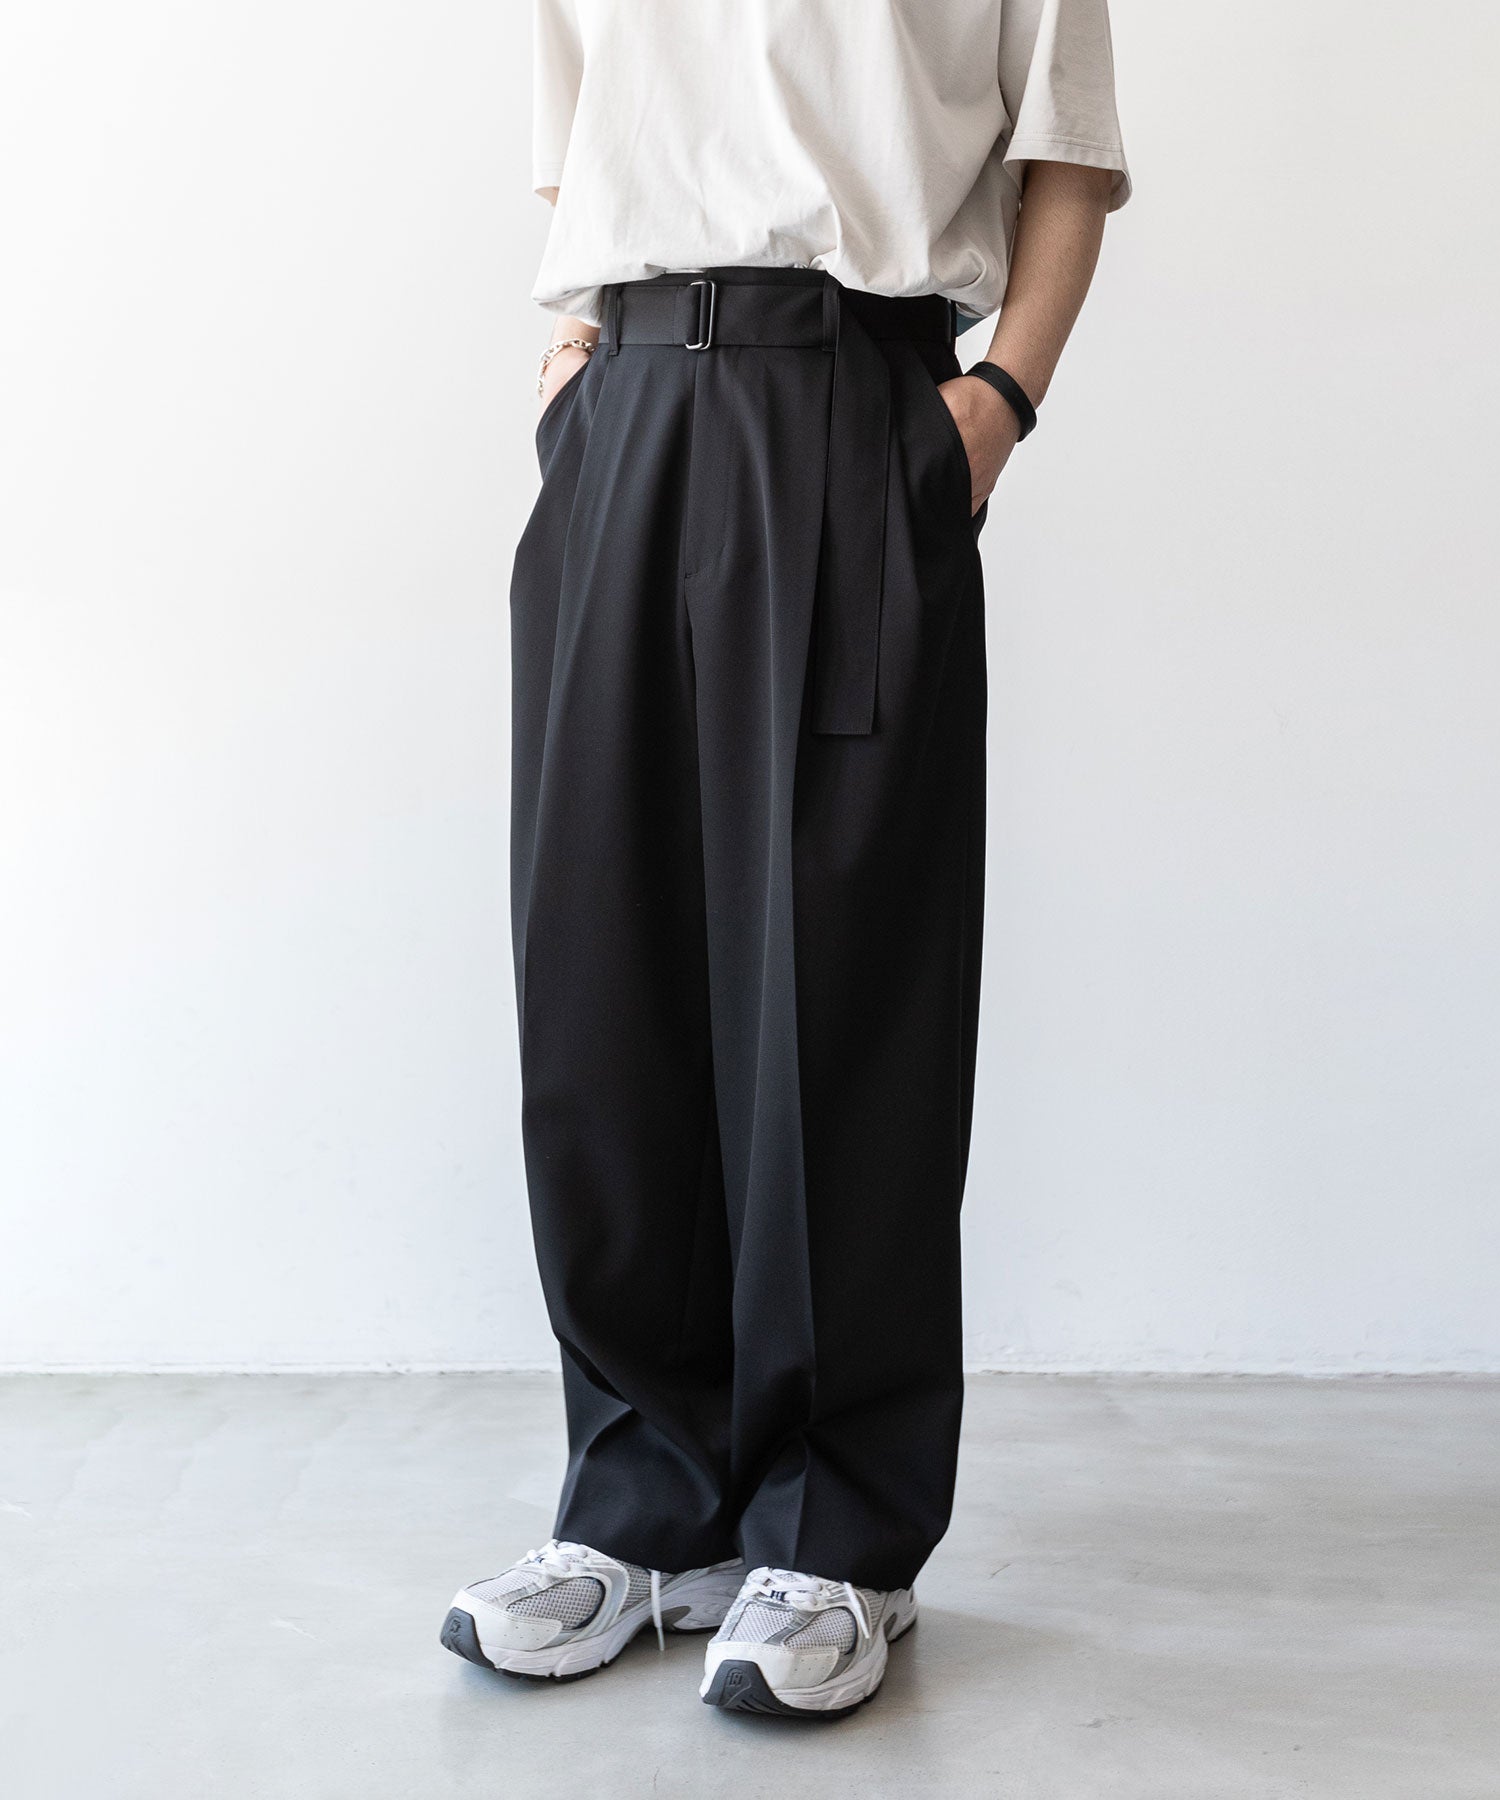 【stein】BELTED WIDE STRAIGHT TROUSERS シュタイン23aw sessionセッション福岡セレクトショップ 公式通販サイト